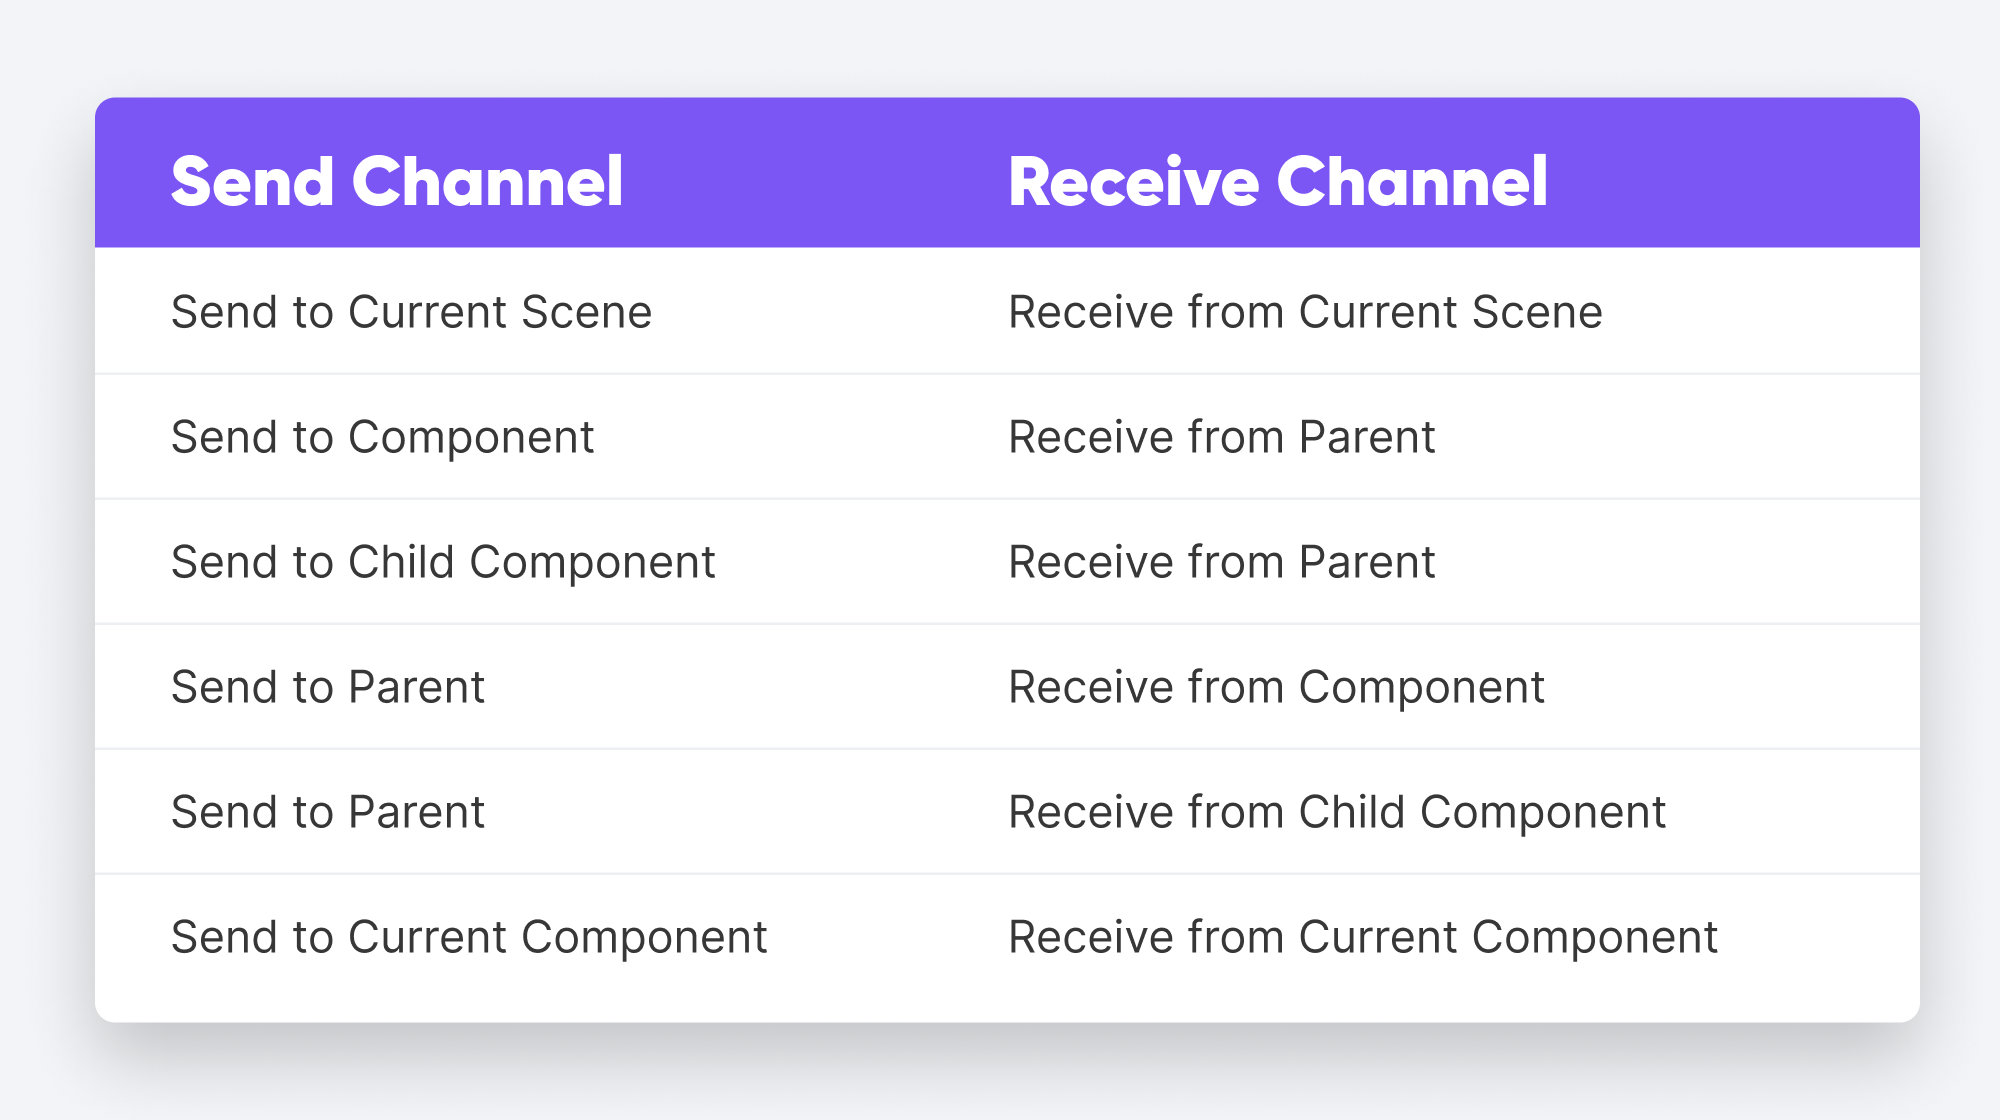 Matching Send and Receive channels